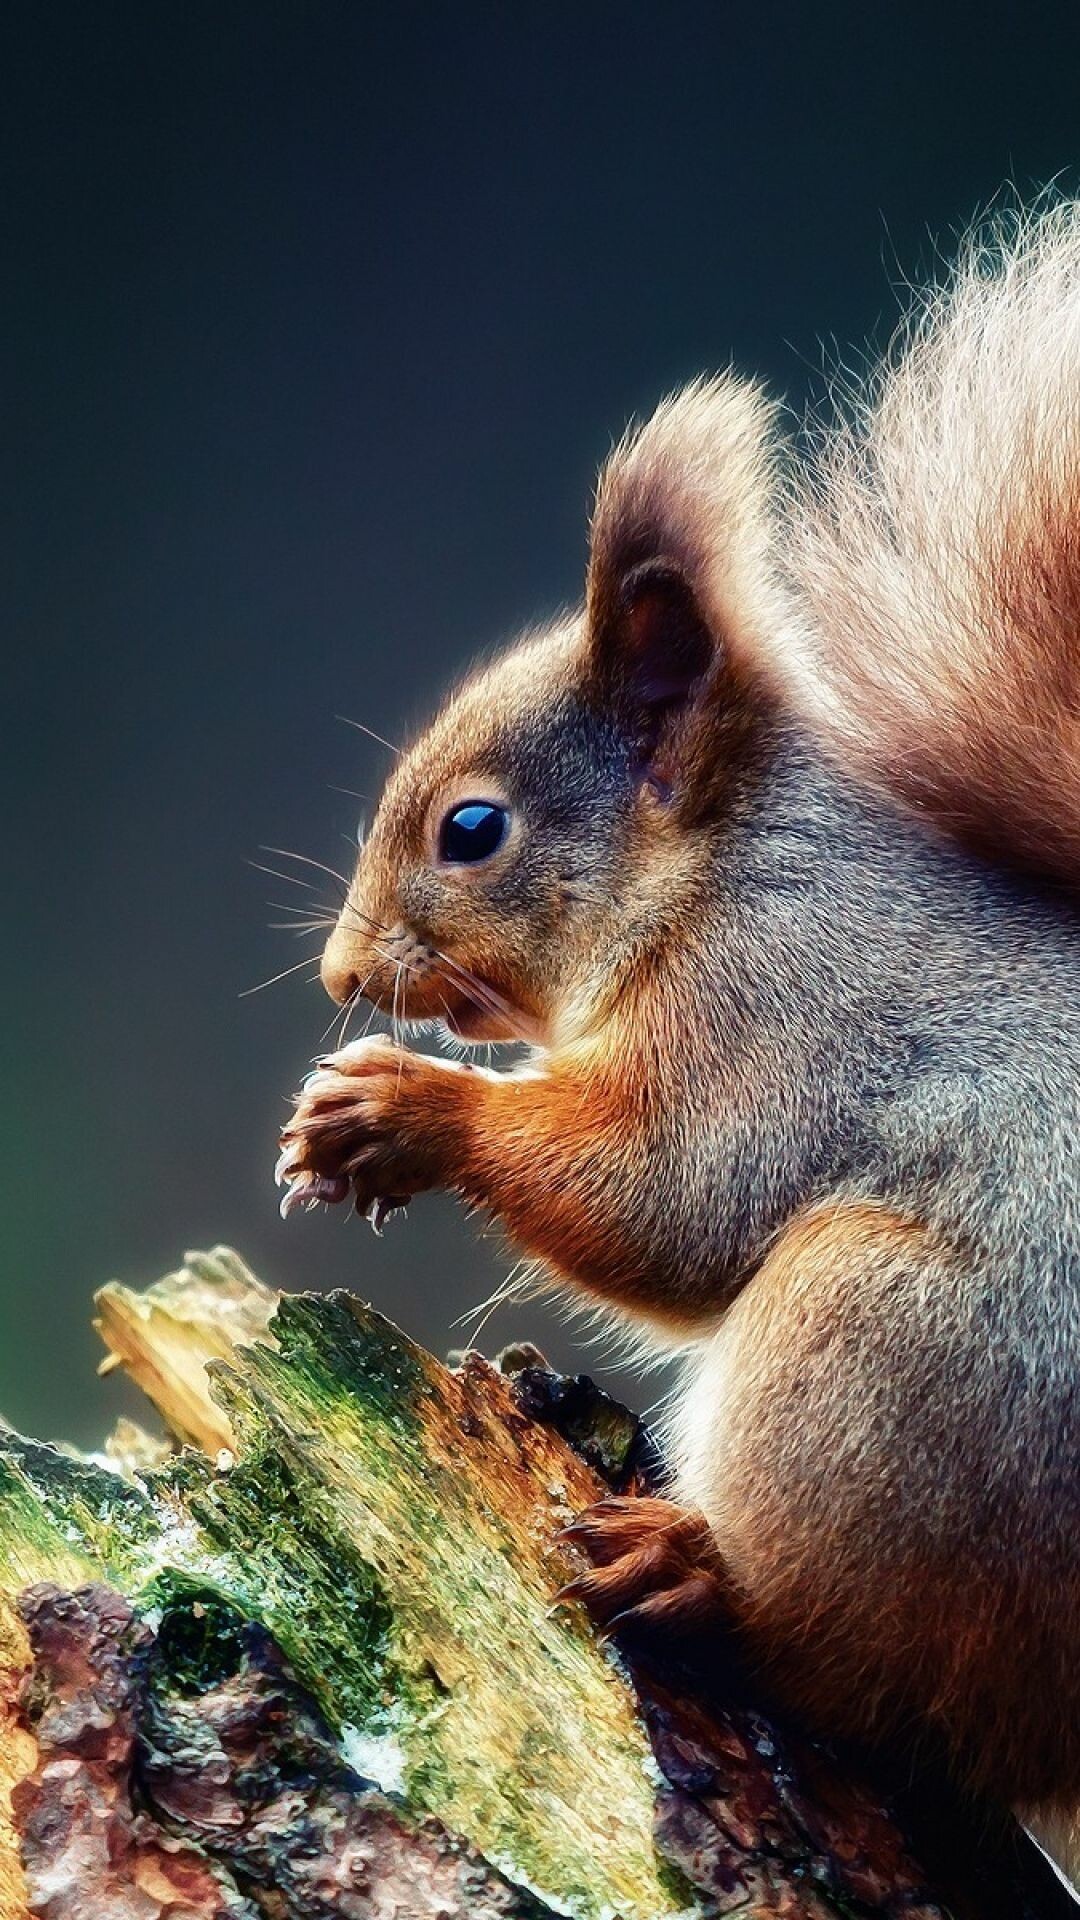 Squirrel: Wild animal, An arboreal, primarily herbivorous rodent. 1080x1920 Full HD Wallpaper.